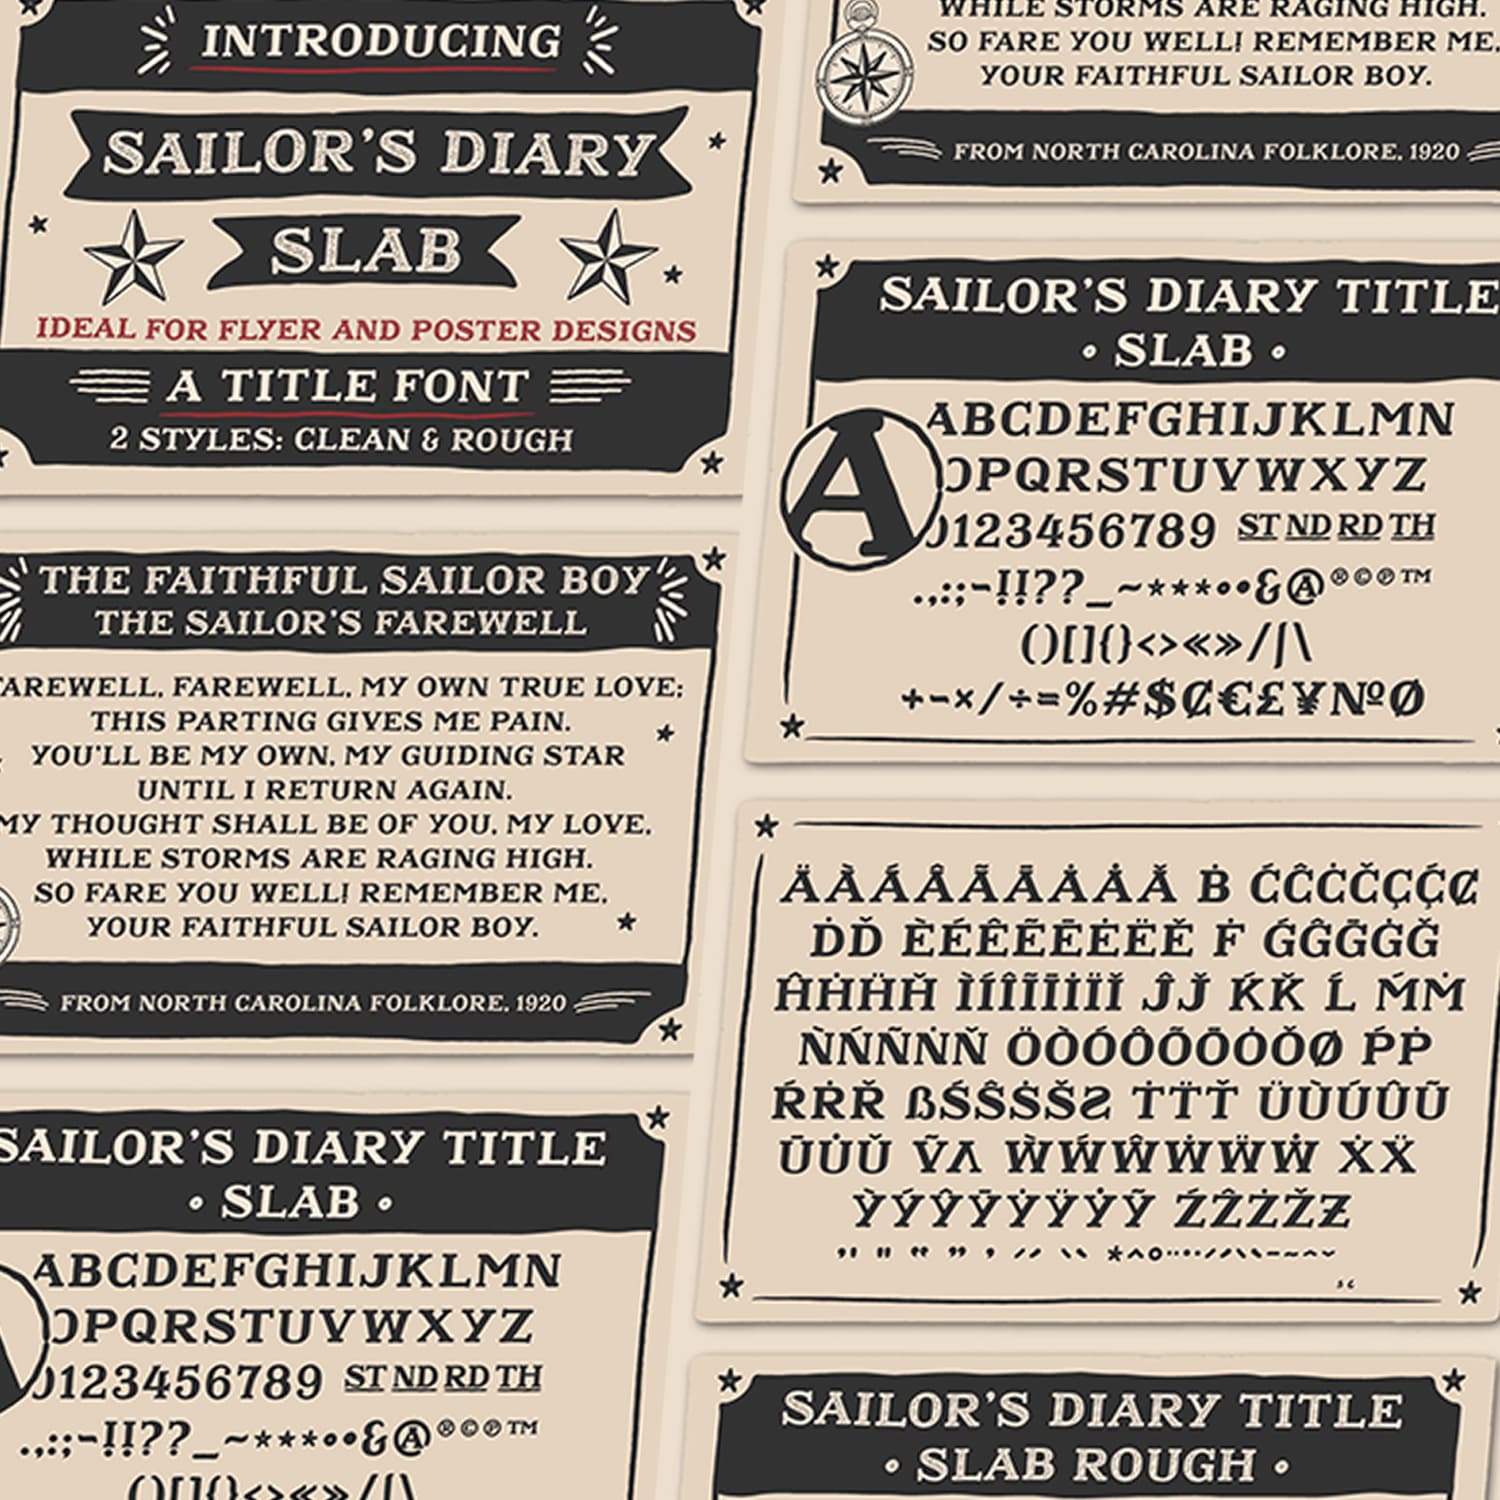 Sailors Diary Title Slab cover image.